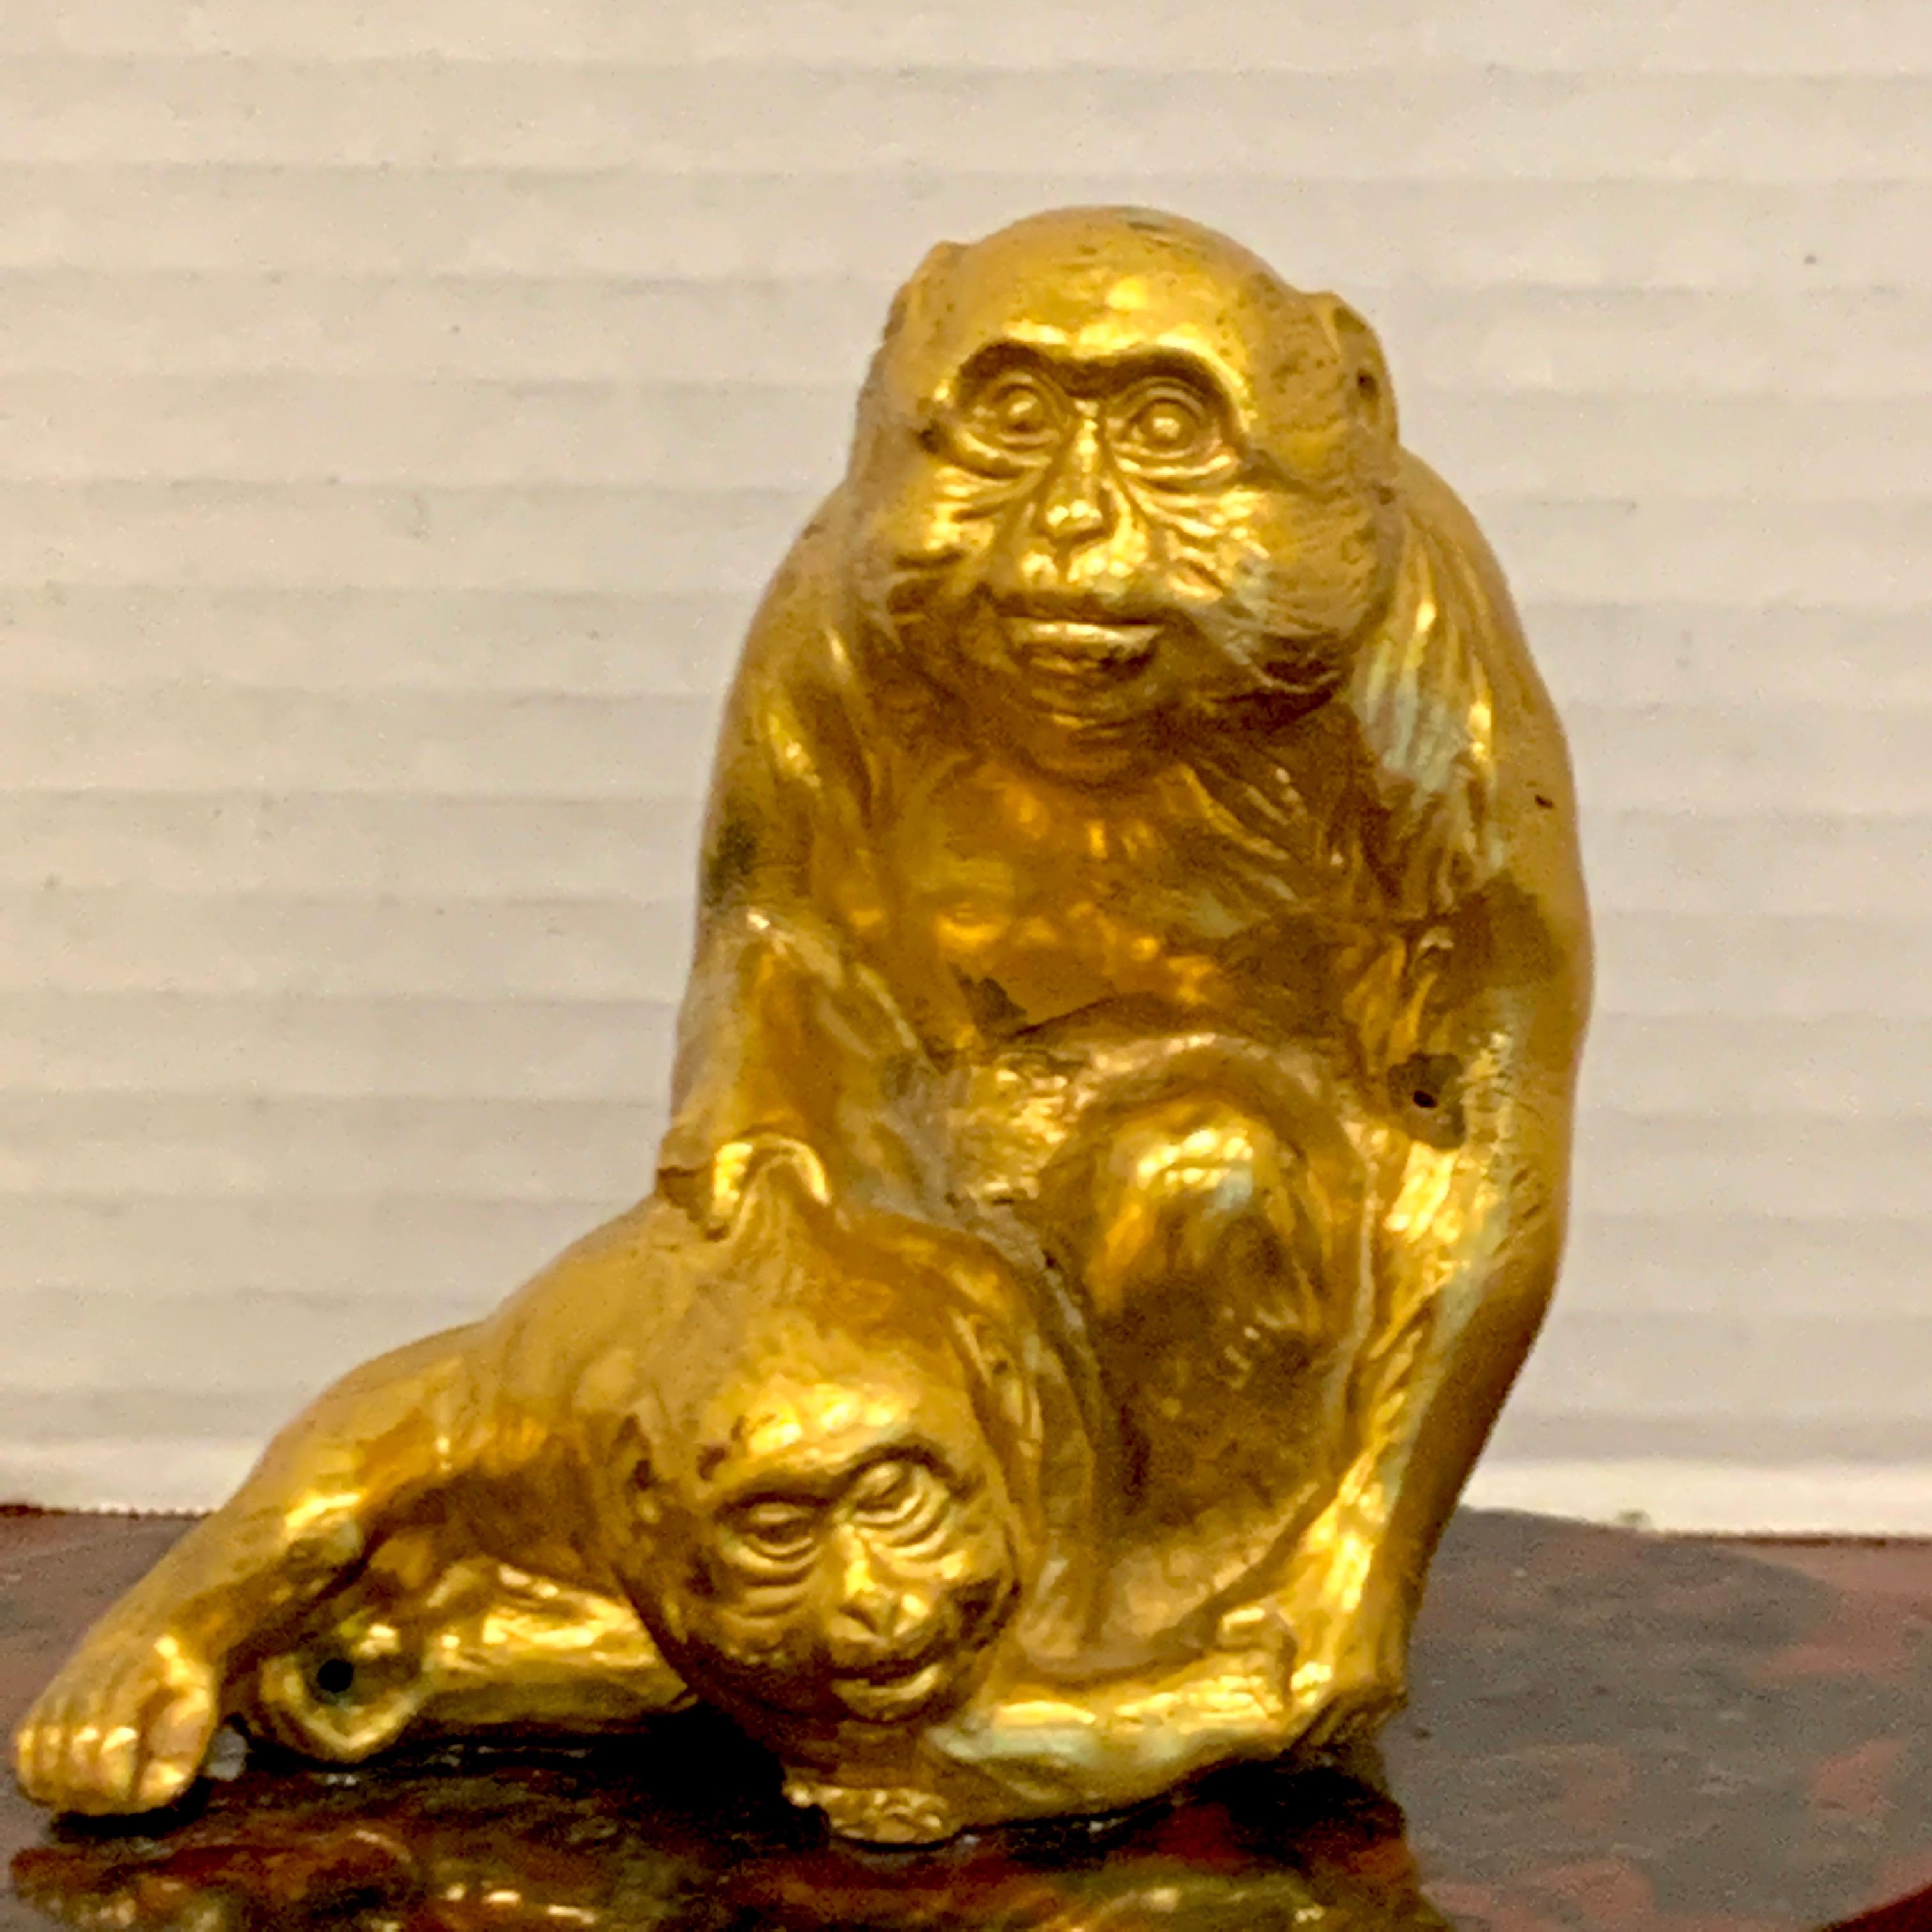 French gilt bronze sculpture of seated monkeys, nicely detailed, two expressive sitting primates, attached to an oval bloodstone marble base, unsigned.
   